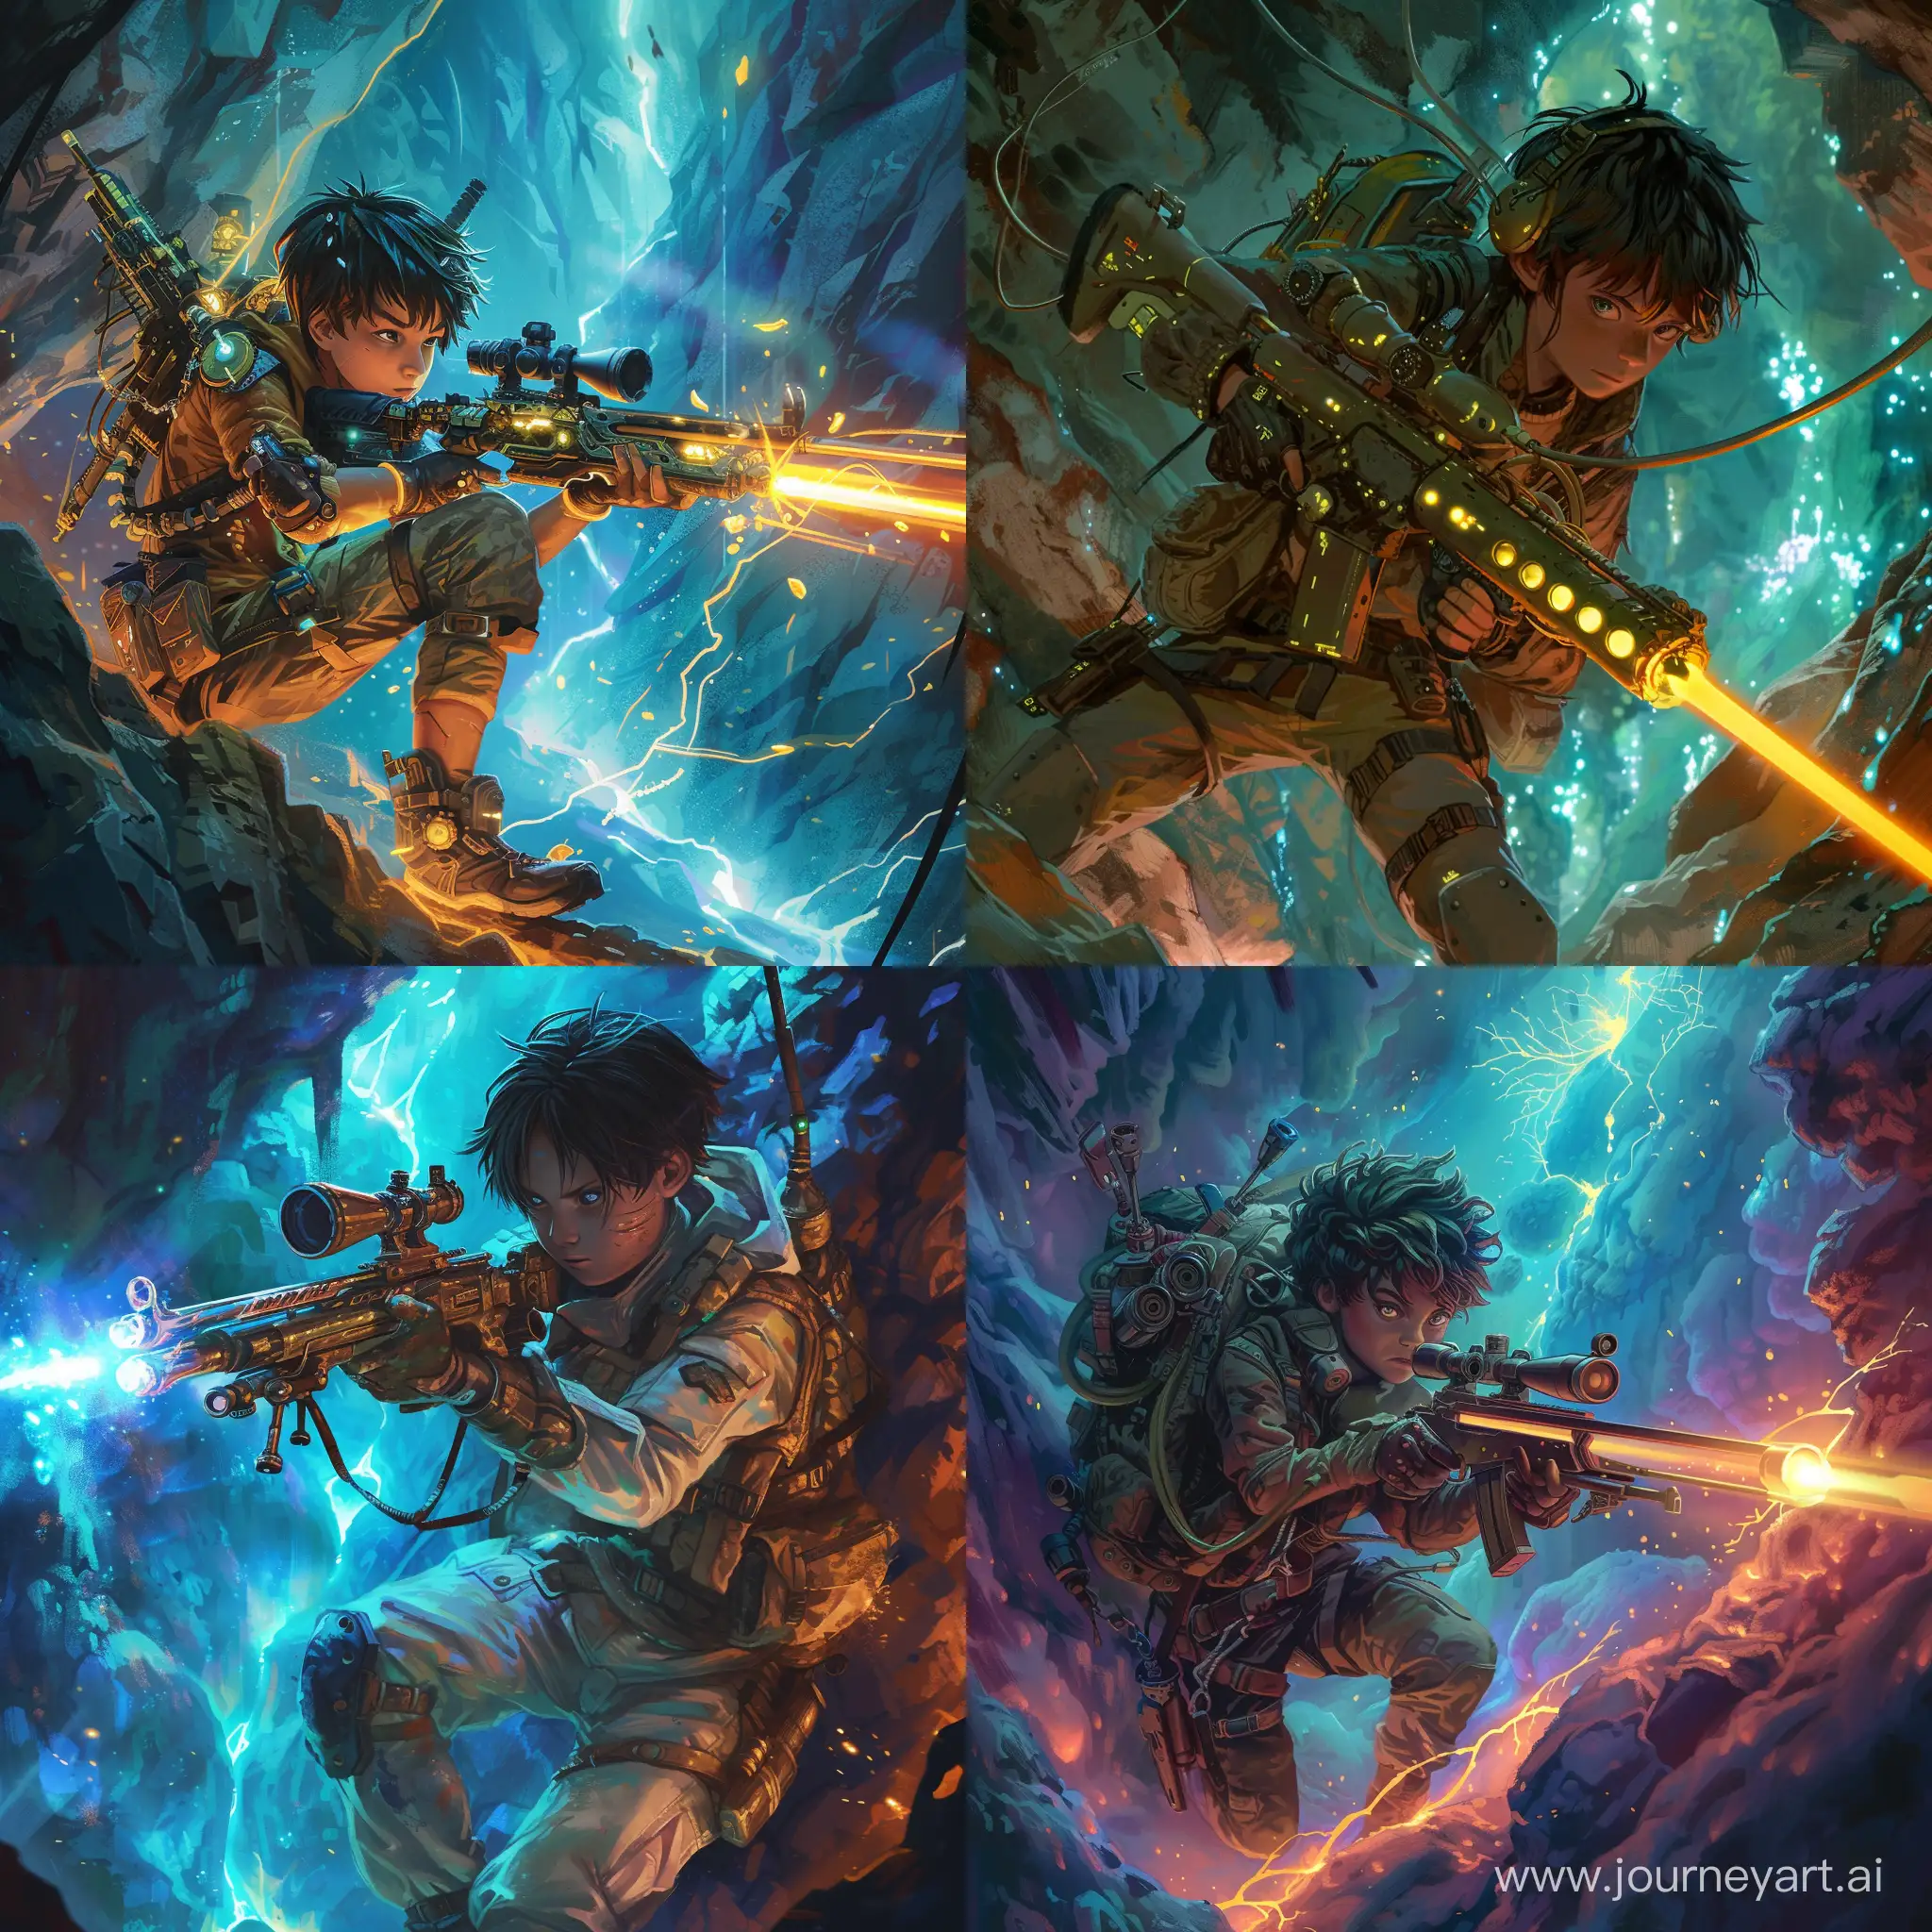 Youthful-Cave-Raider-Explores-Luminous-Abyss-with-Stylistic-Rifle